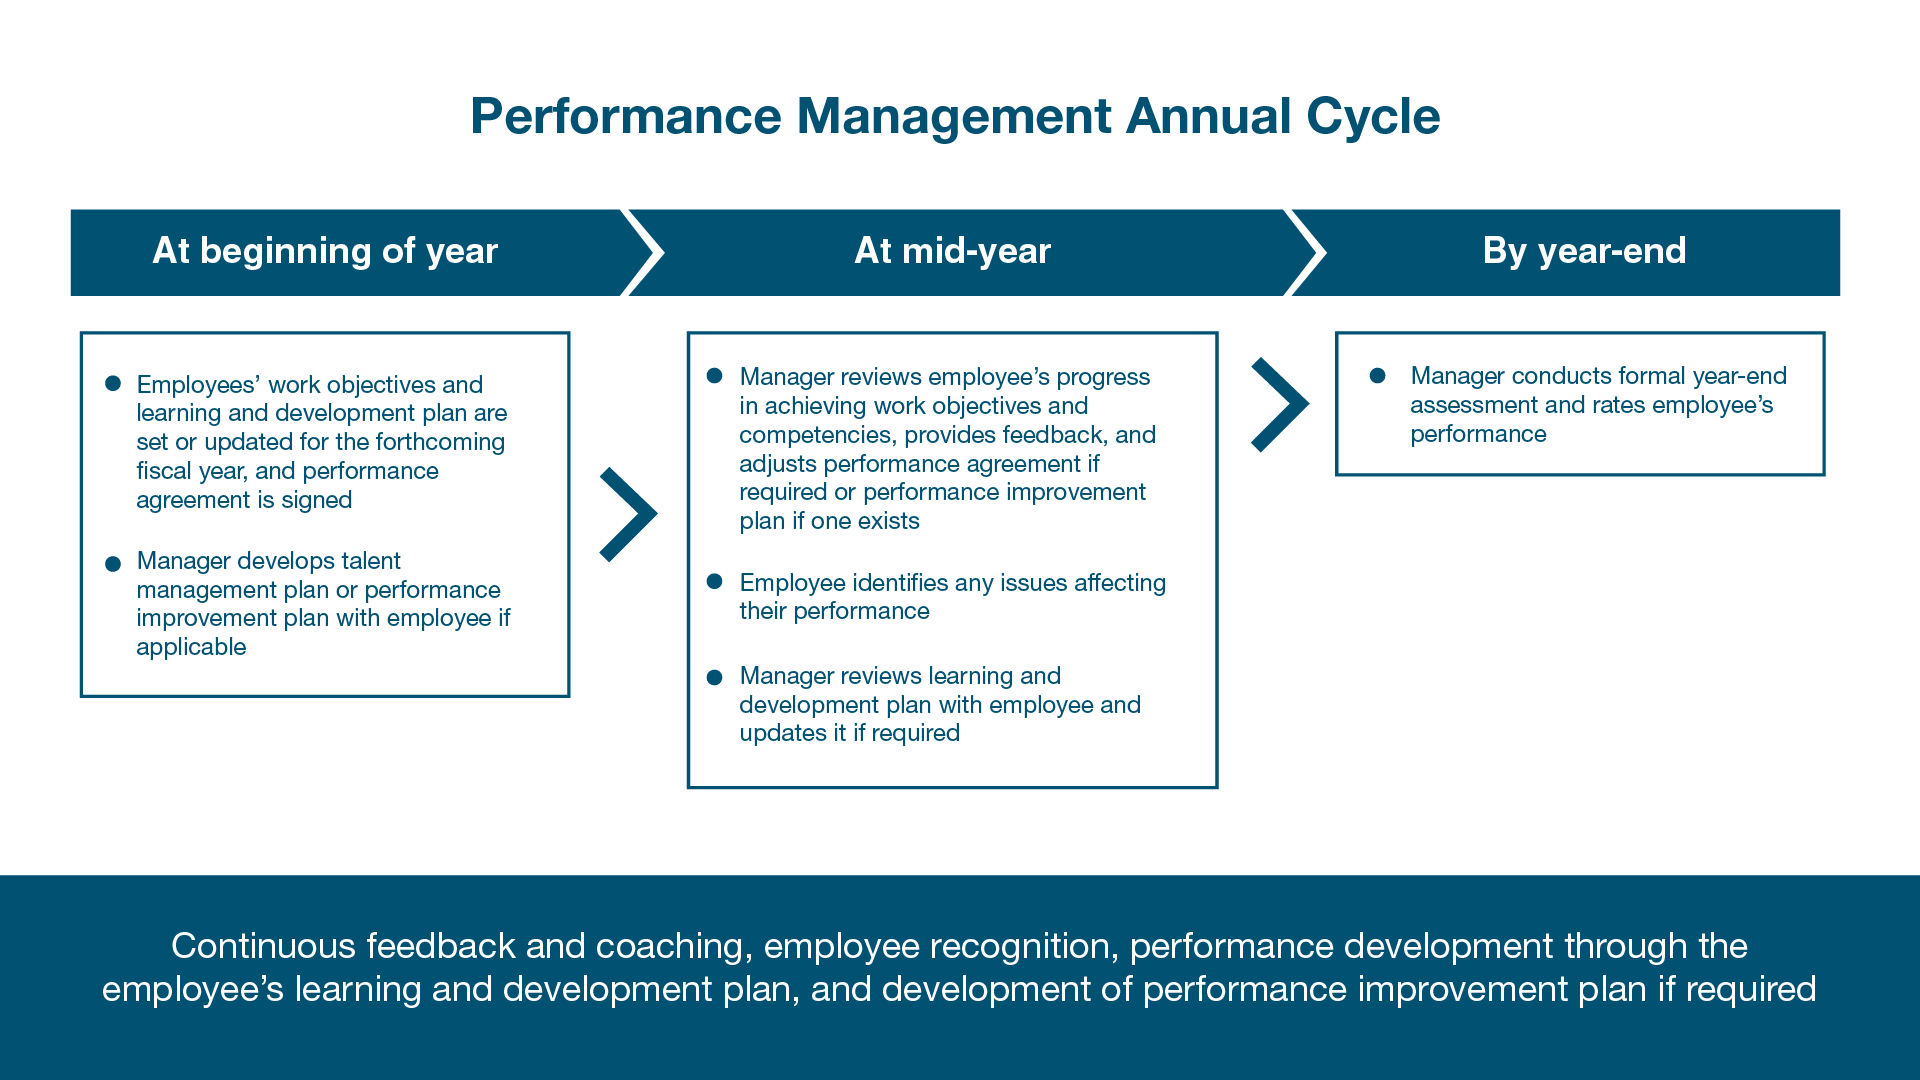 Performance Management Annual Cycle. Text version below: